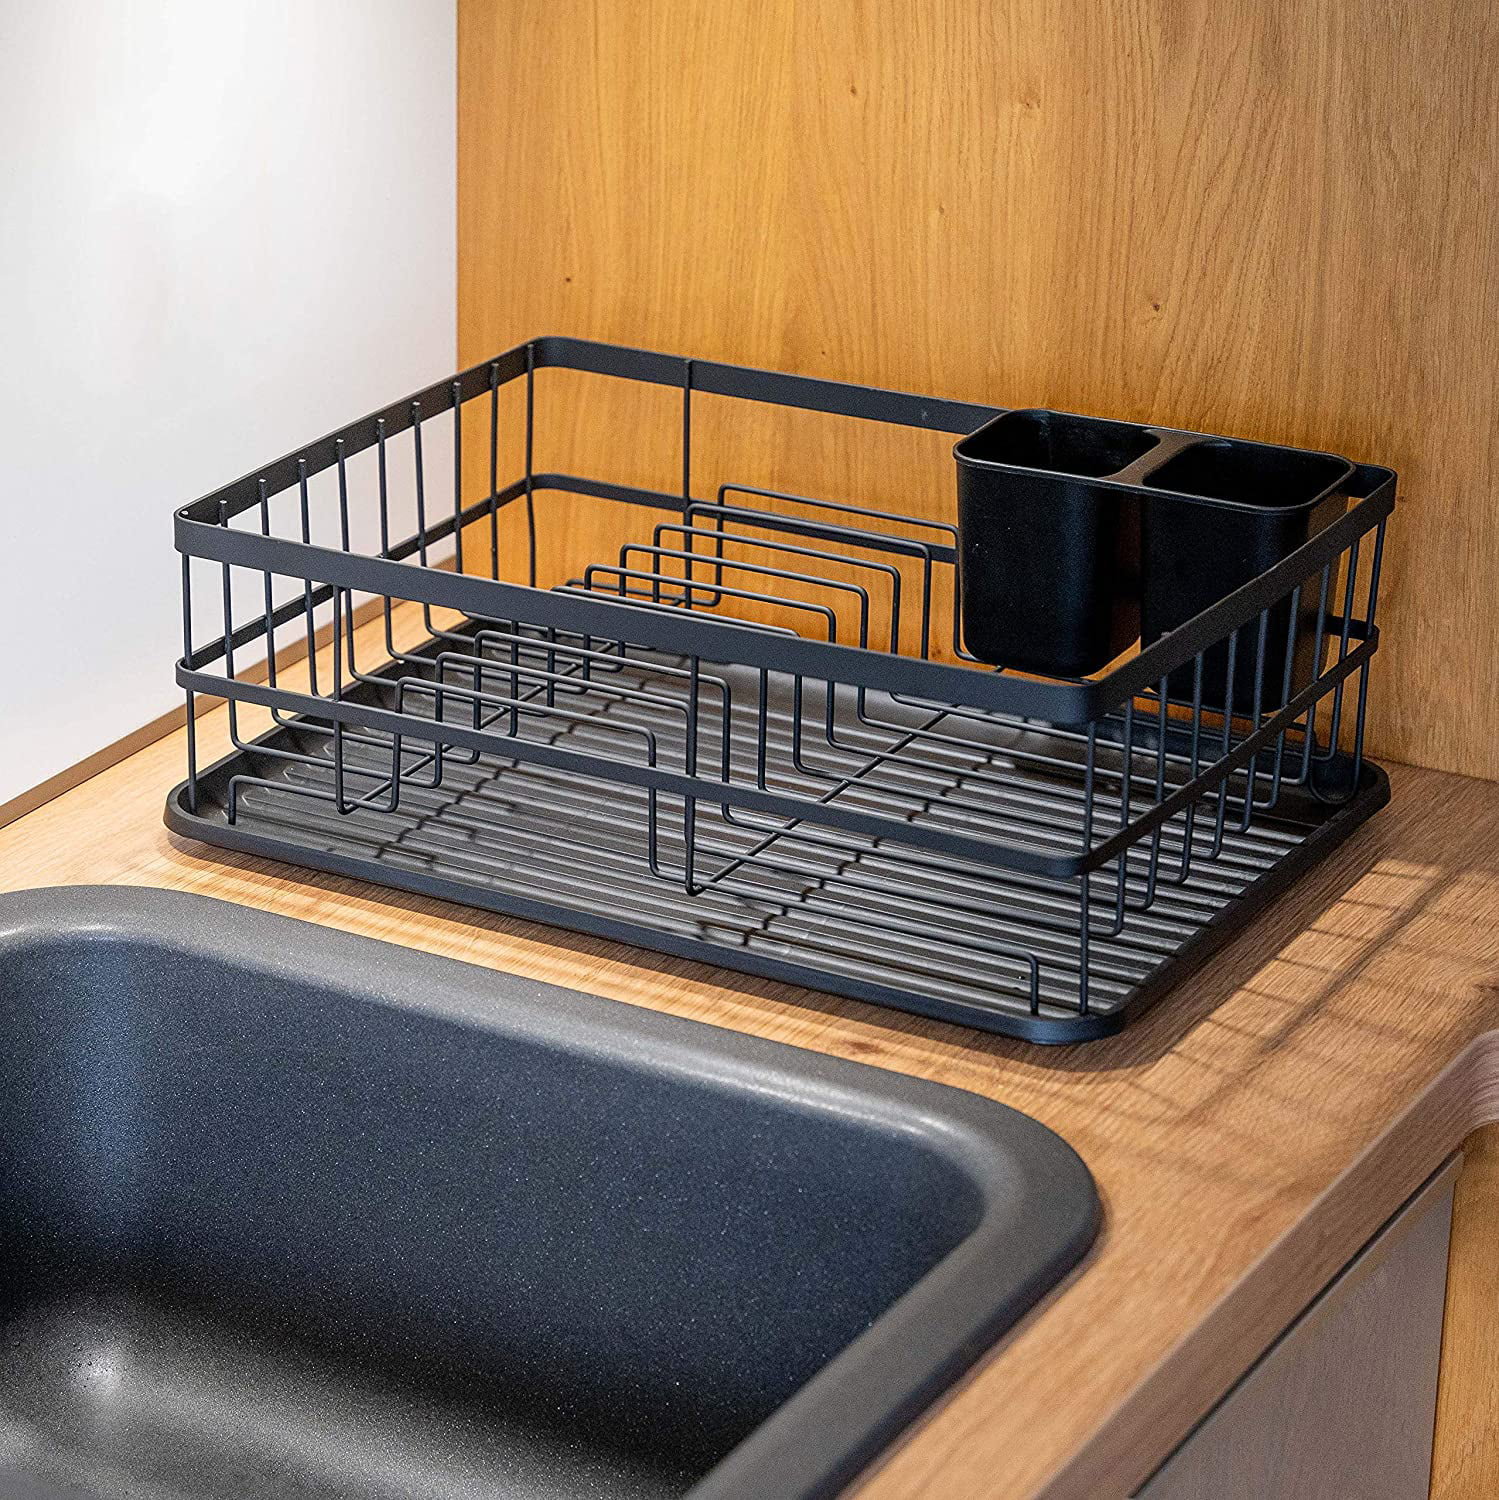 Matte Black Metal Dish Rack (42 X 31.5 X 15.5Cm) - Over Sink Dish Rack With  Cutlery Holder And Plastic Drip Tray For Storage 